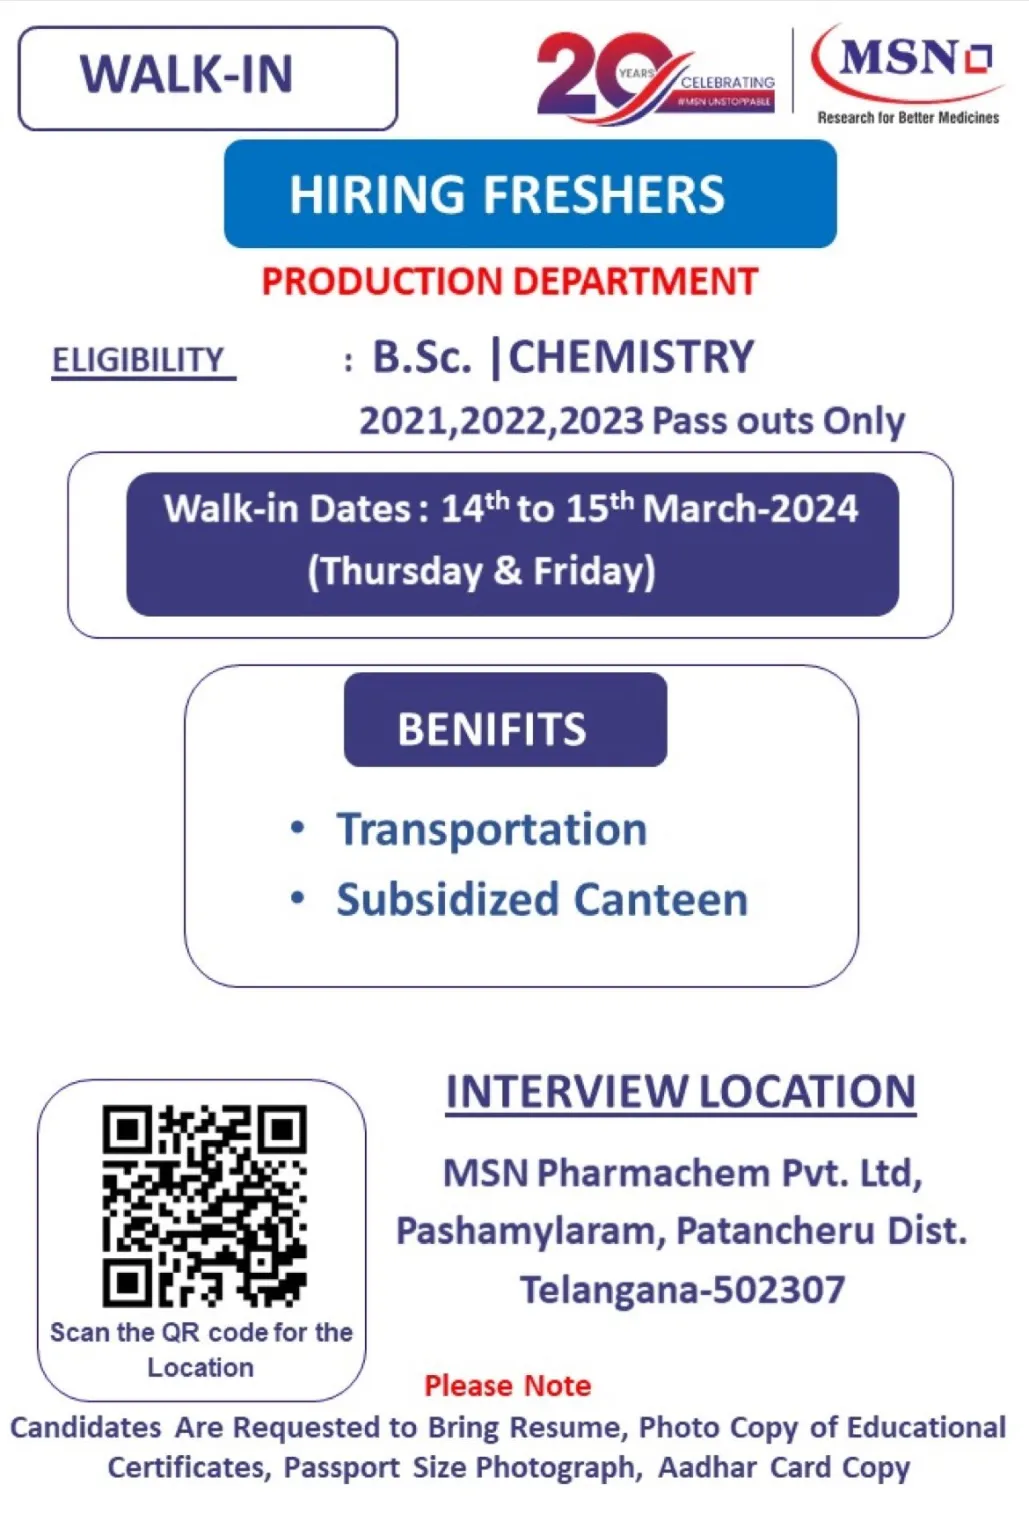 MSN Pharmachem - Walk-In Interview for FRESHERS on 14th & 15th Mar 2024